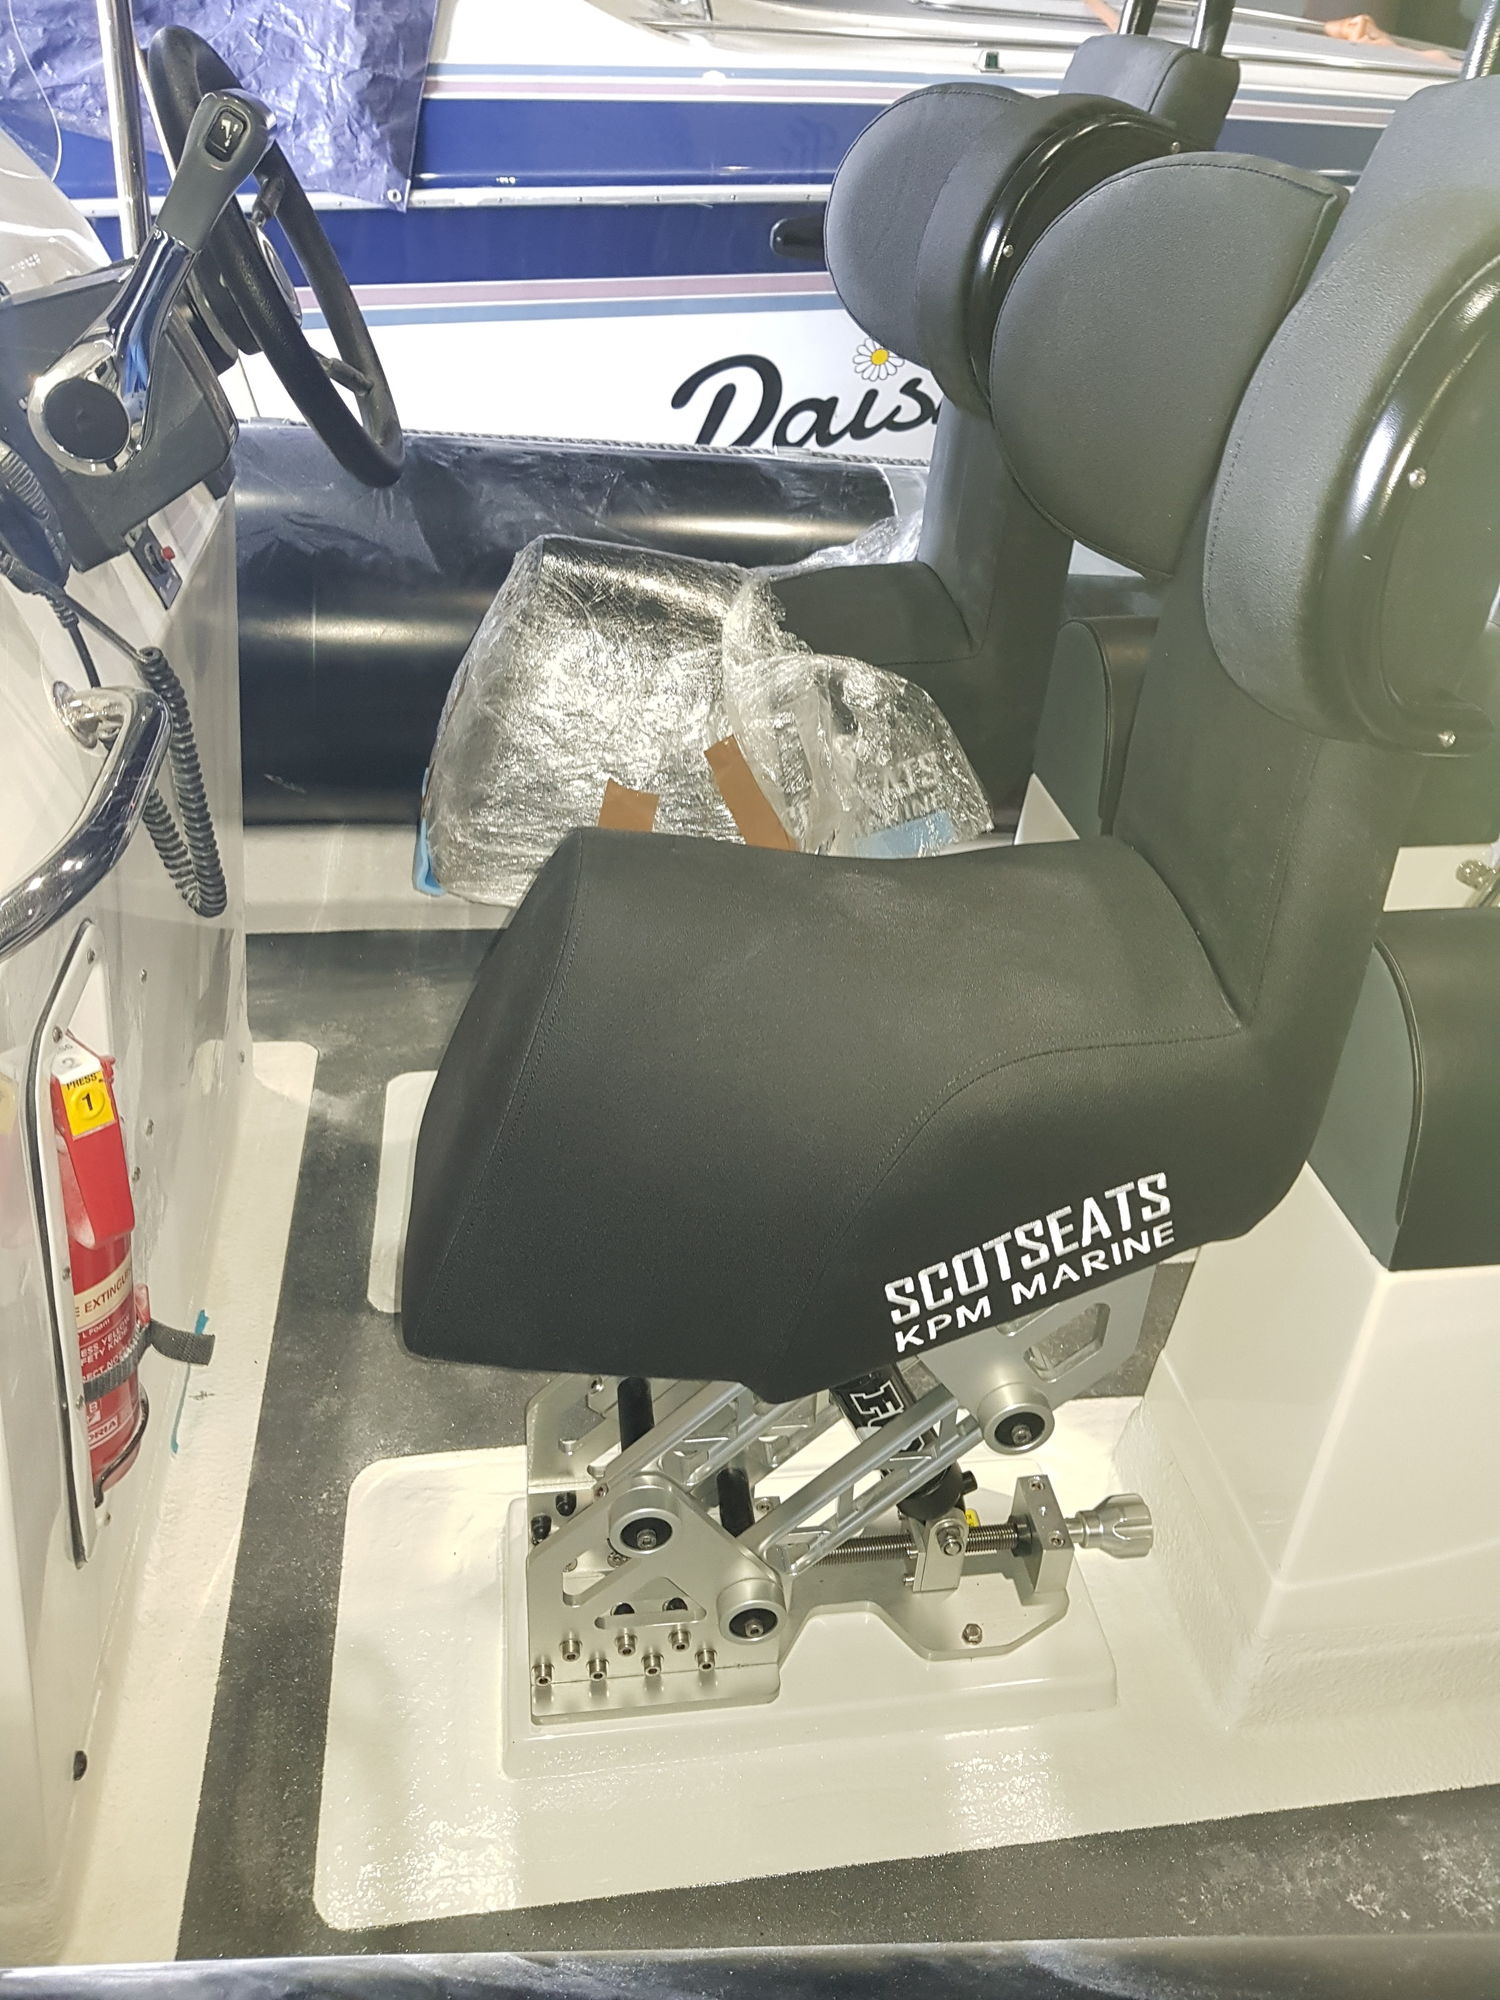 Suspension seats - opinions - The Hull Truth - Boating and Fishing Forum